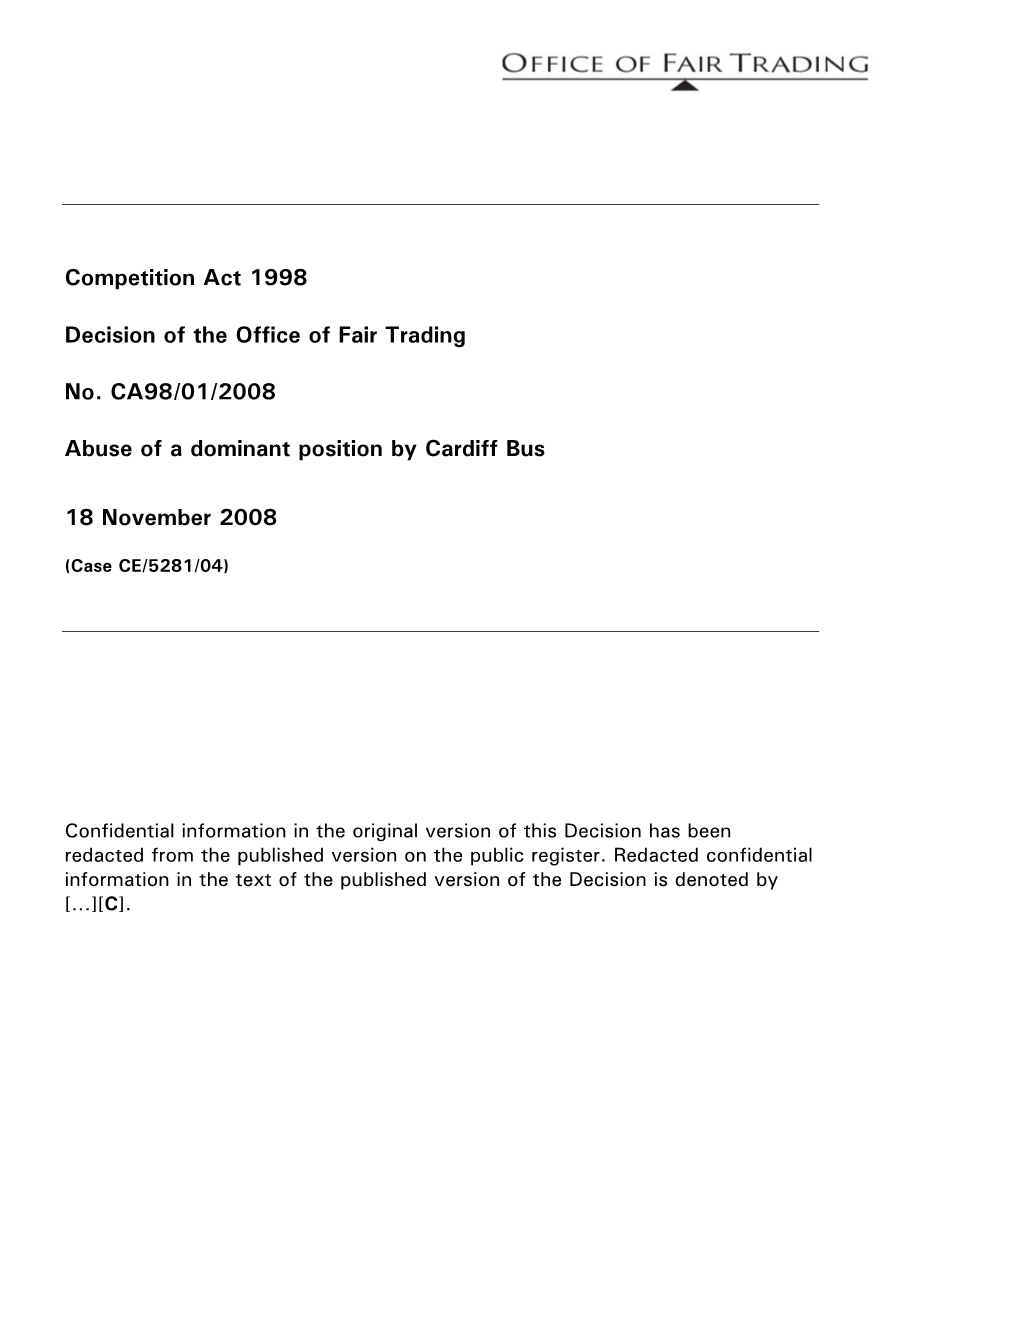 Competition Act 1998 Decision of the Office of Fair Trading No. CA98/01